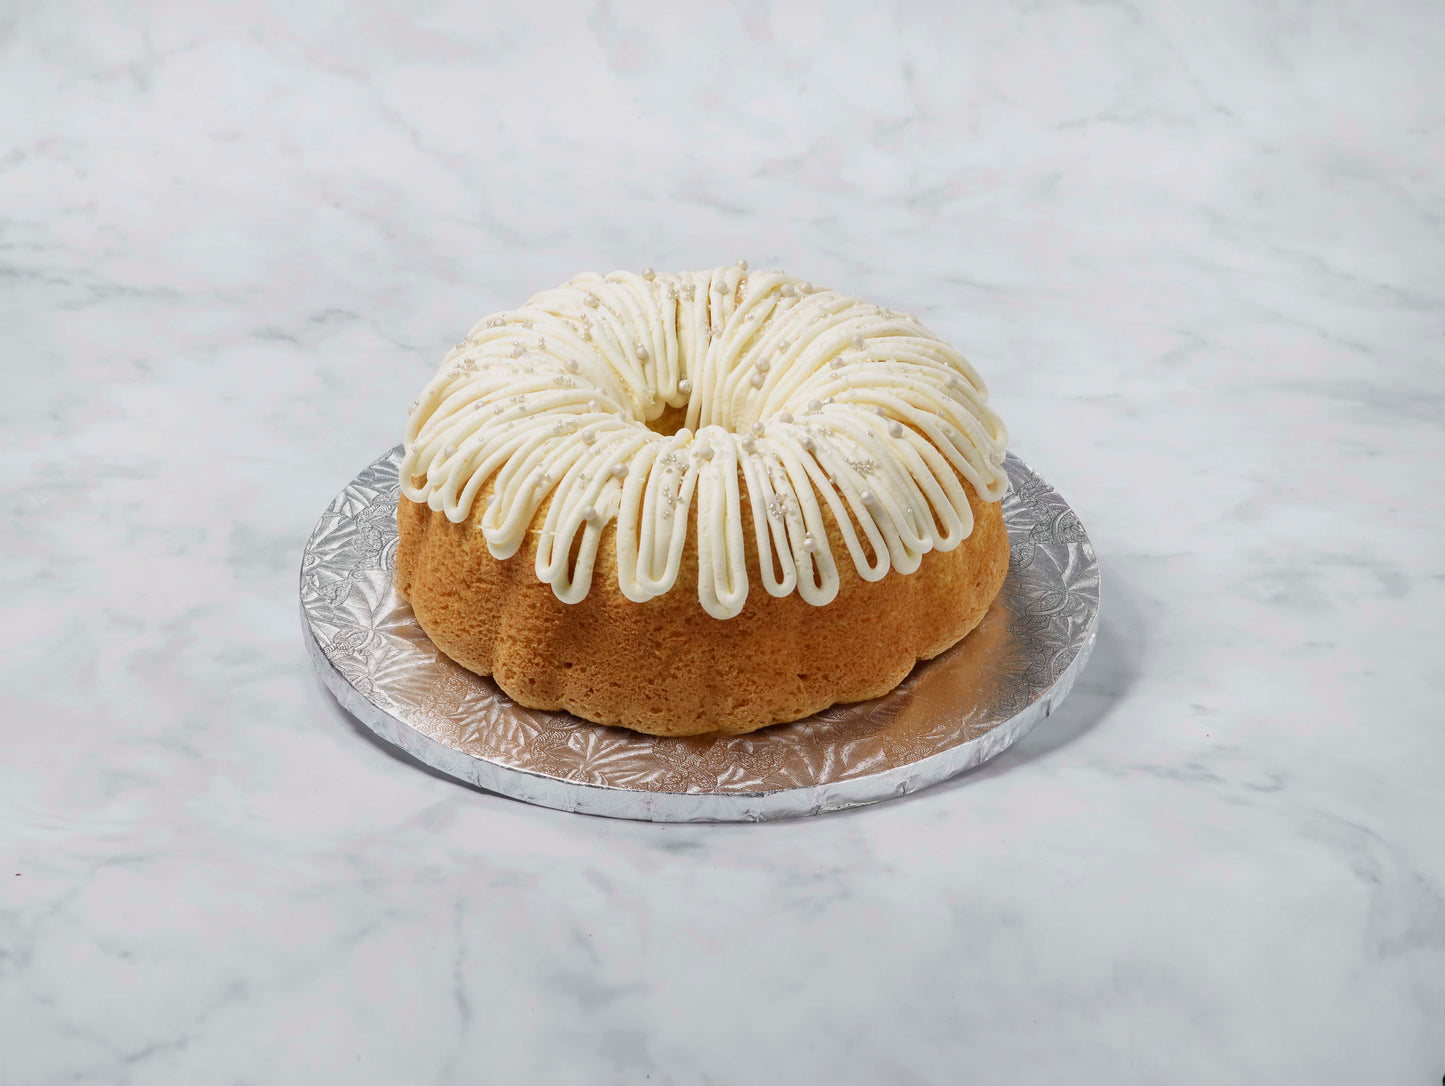 Holiday or Any-day rum bundt cake